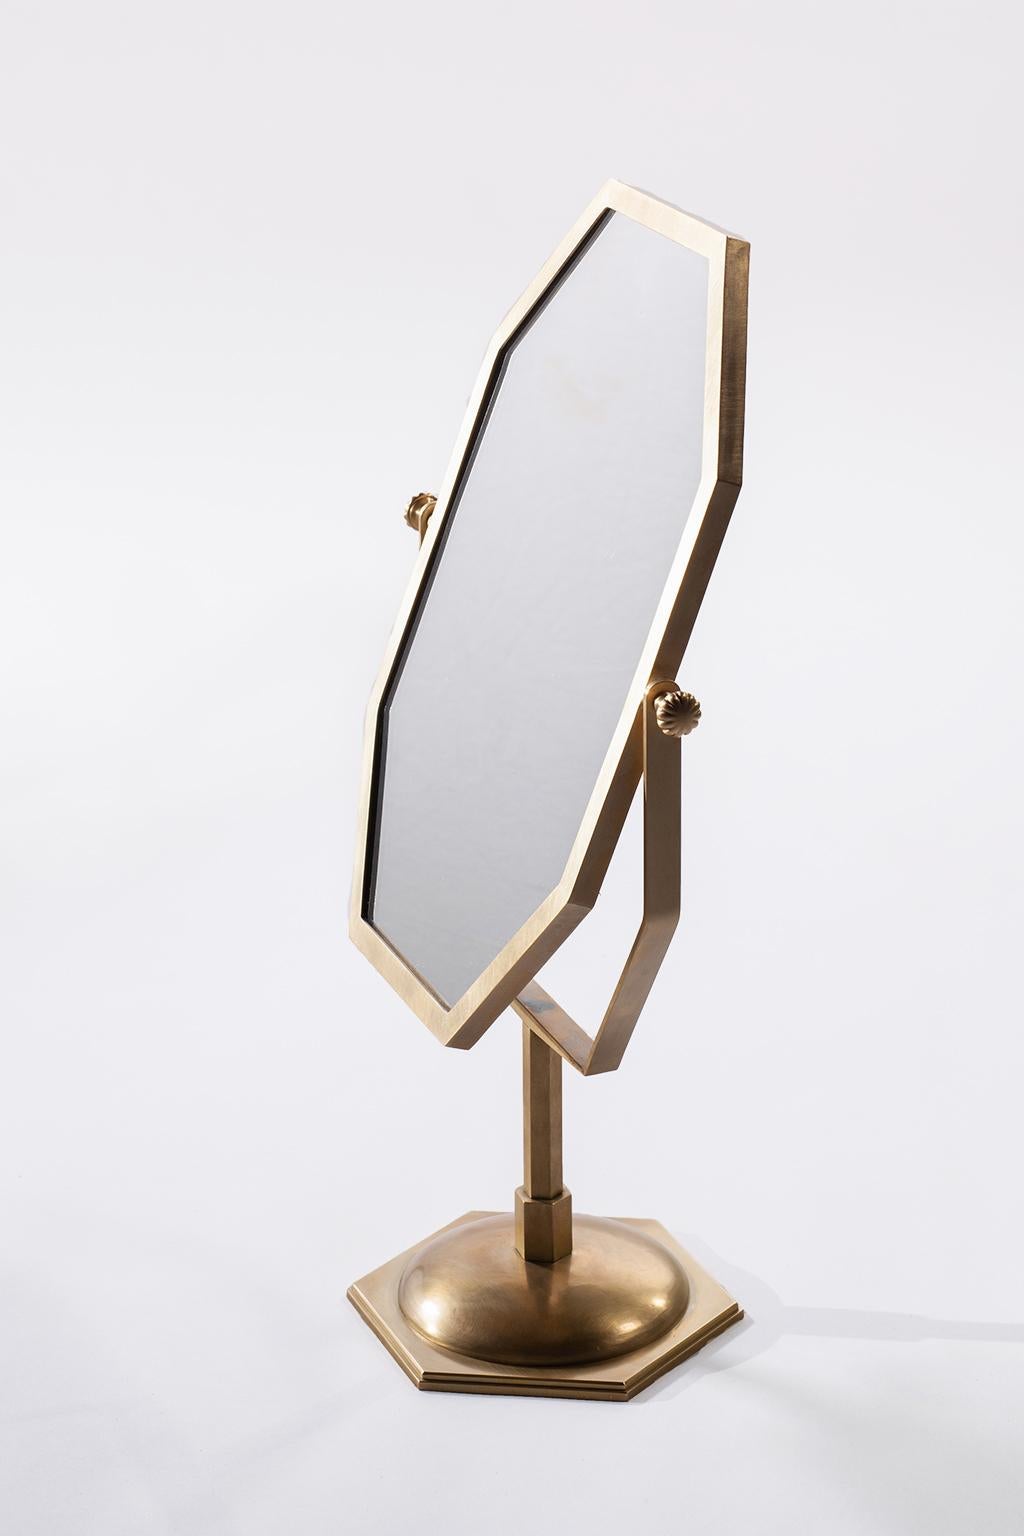 21st Century Small Standing Mirror, Brass Frame and Leather Insert In New Condition For Sale In Lisciano Niccone, Perugia